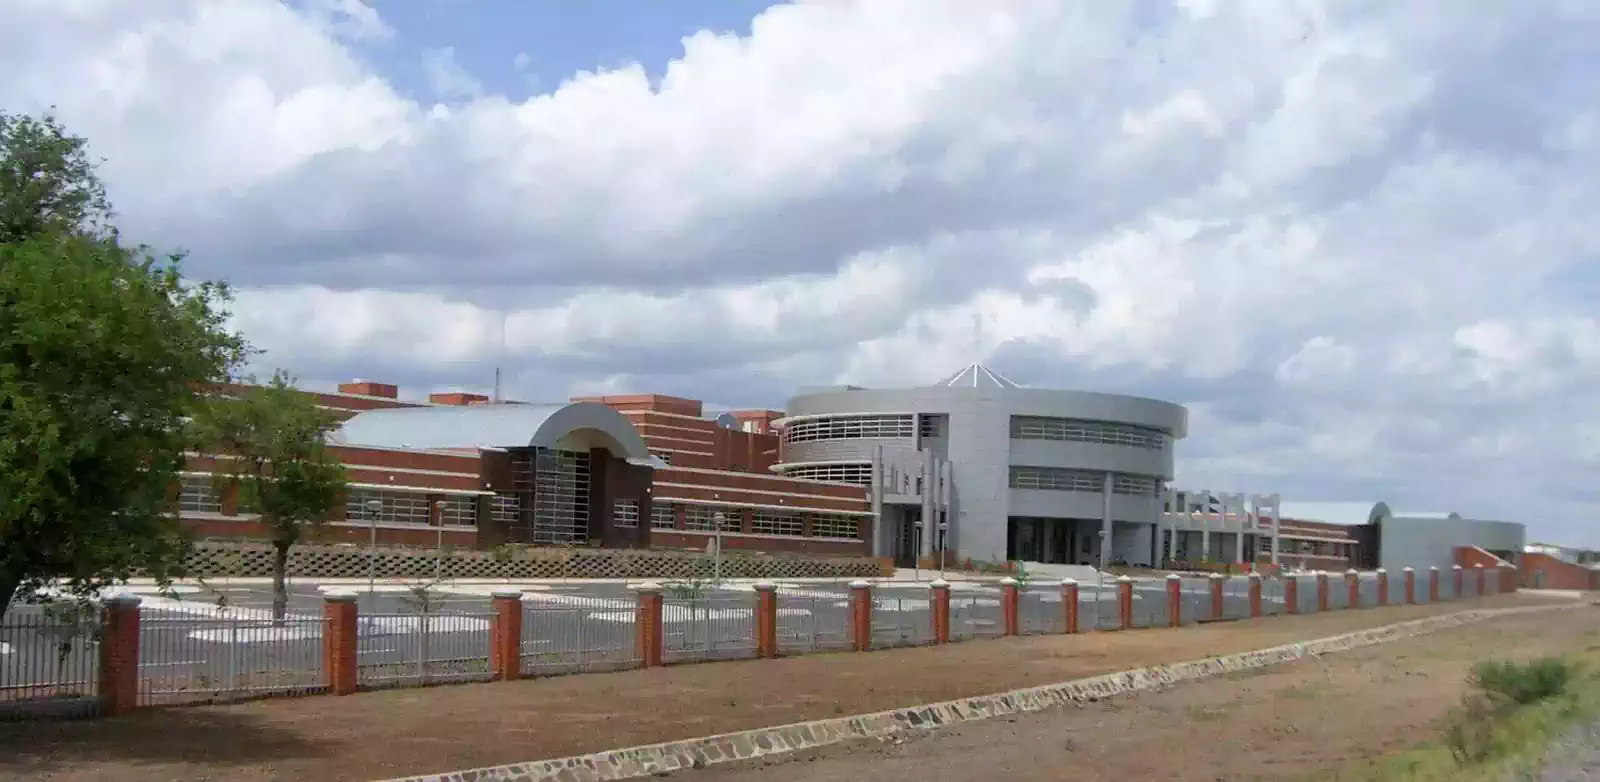 Modern large hospital complex with multiple buildings in Sekgoma